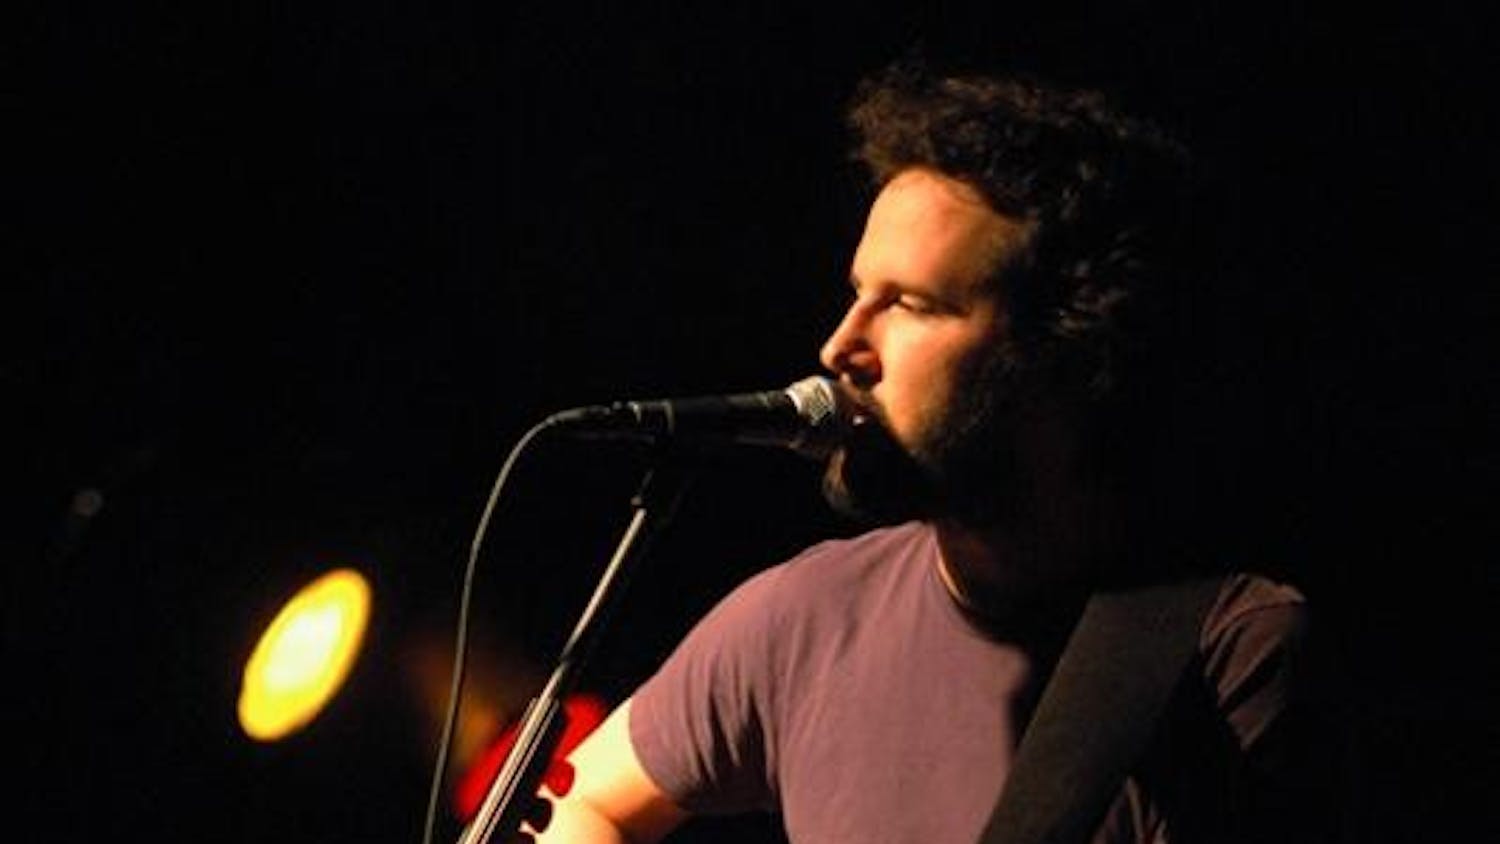 Mason Jennings, a folk singer and songwriter from Minnesota, performs Tuesday at the Bluebird.